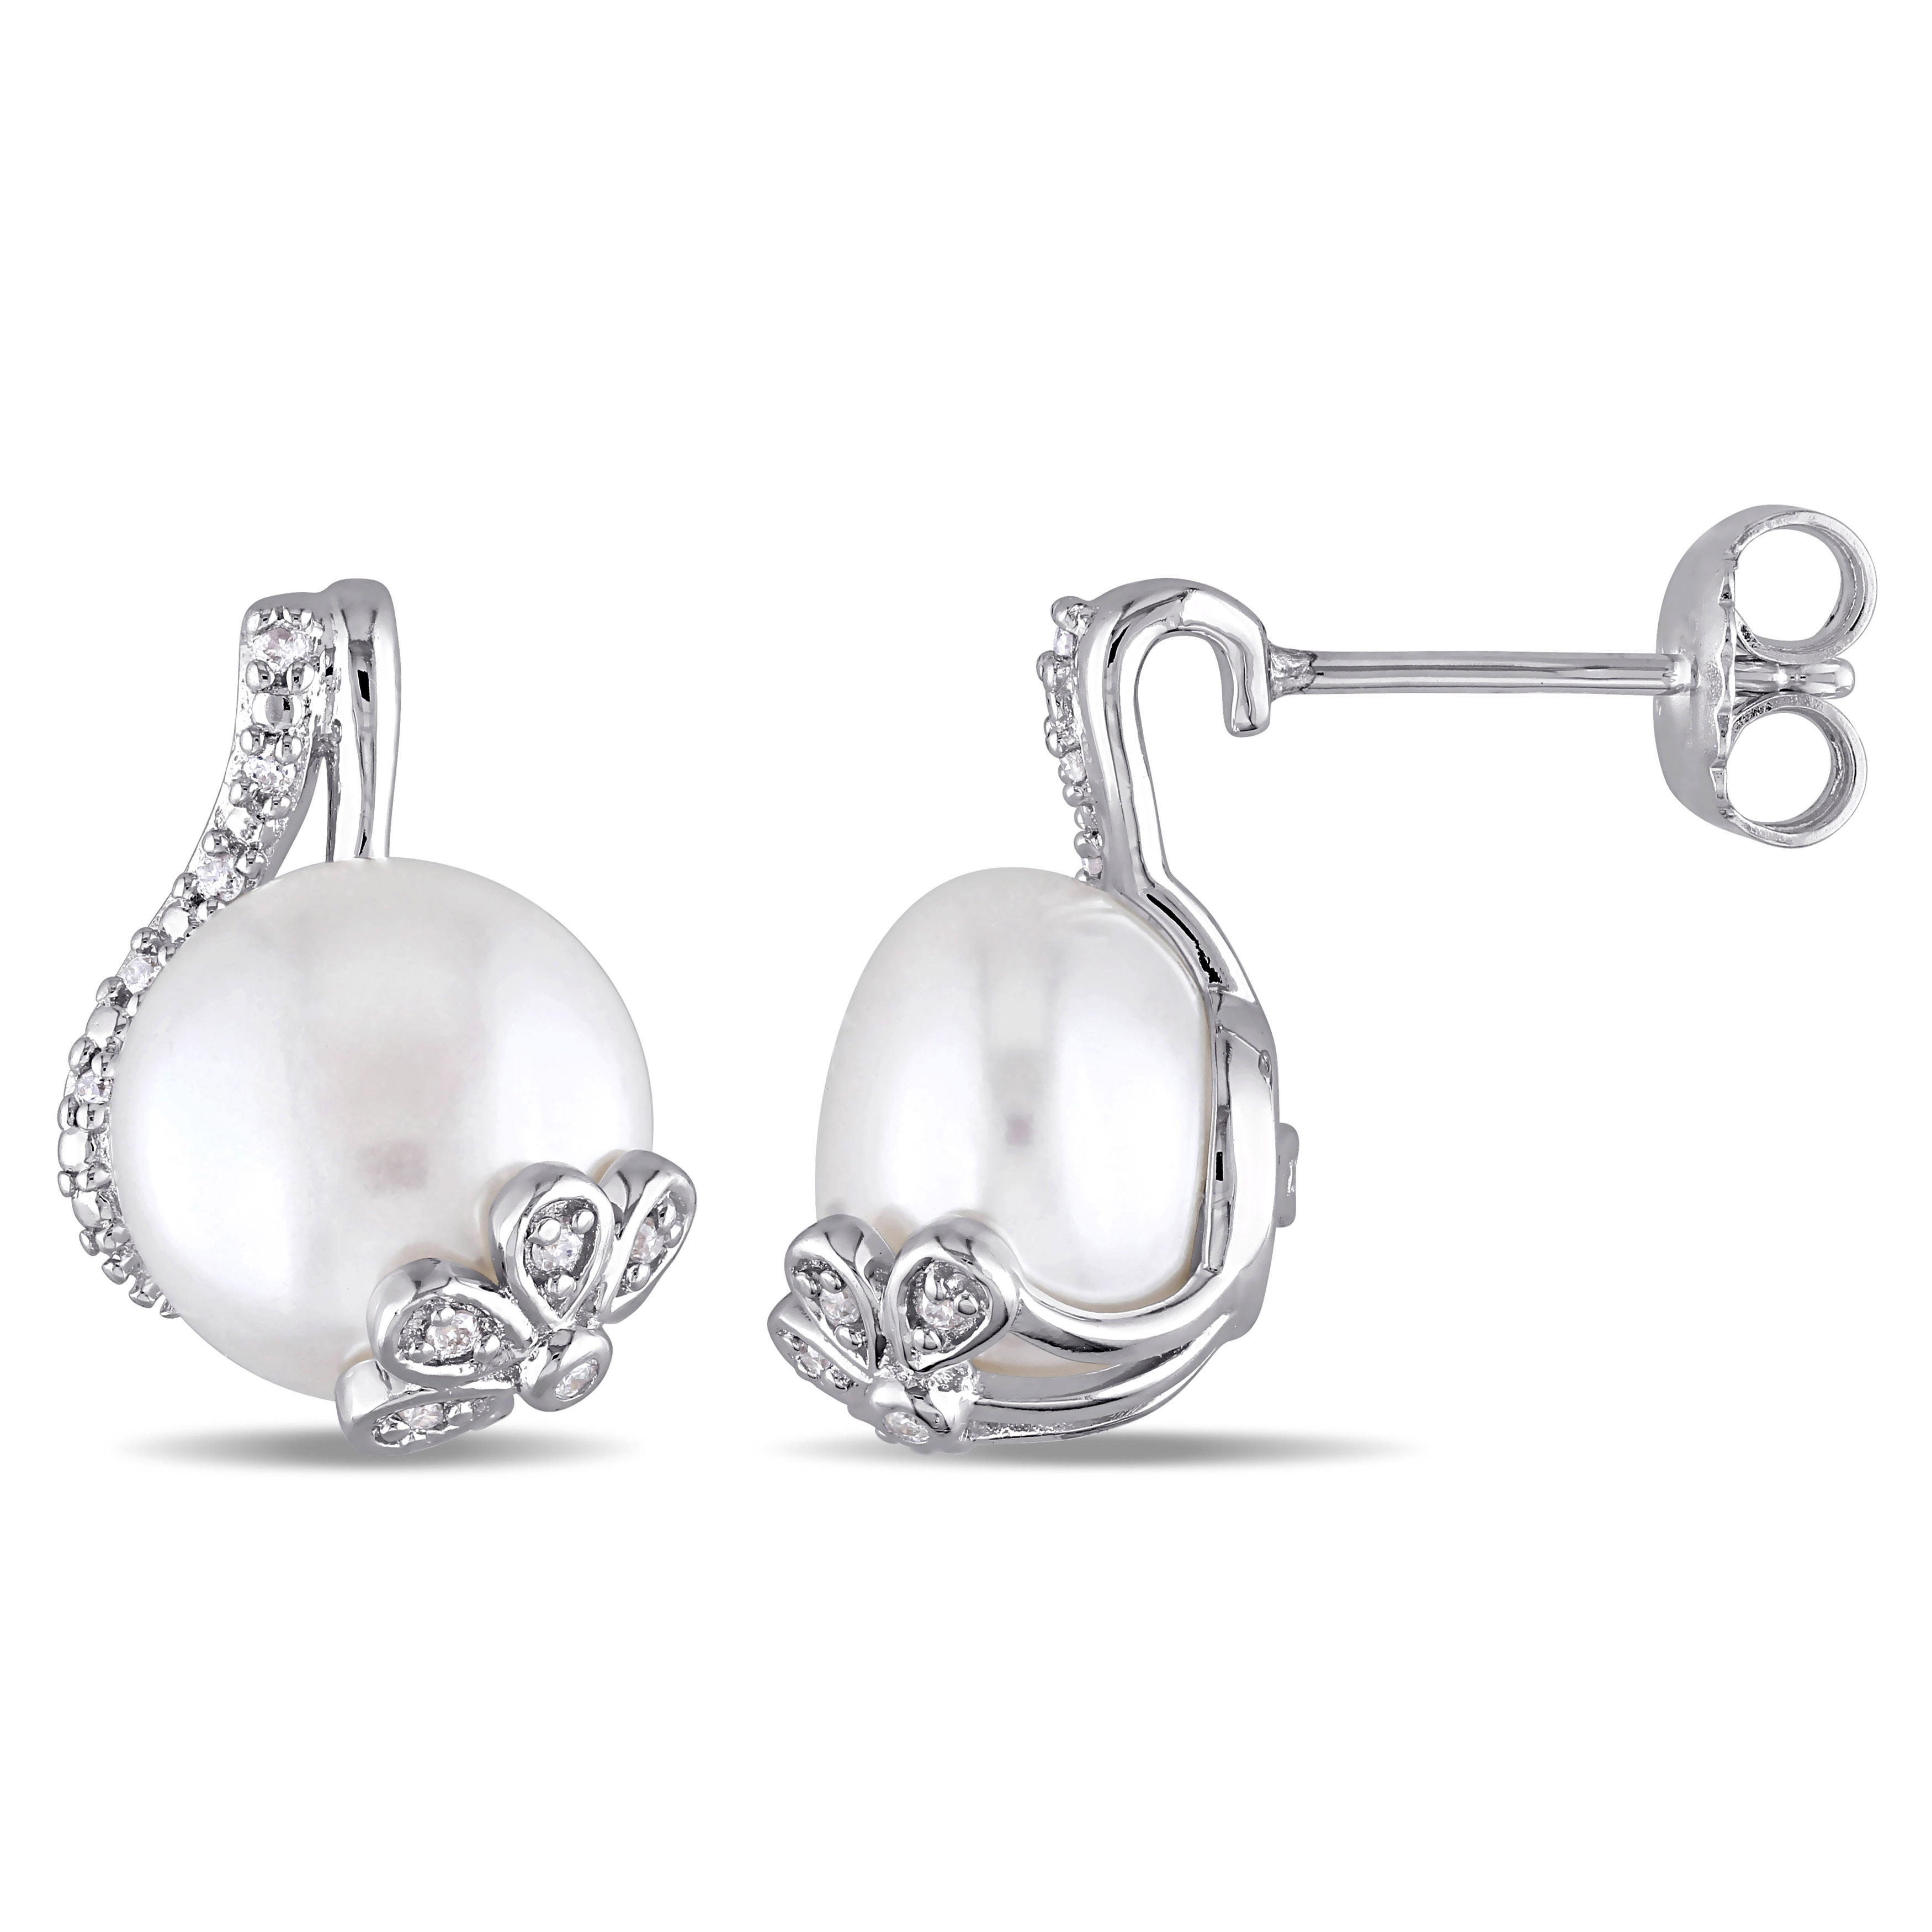 10 - 10.5 MM White Cultured Freshwater Pearl and 1/10 CT TW Diamond Swirl Earrings in Sterling Silver